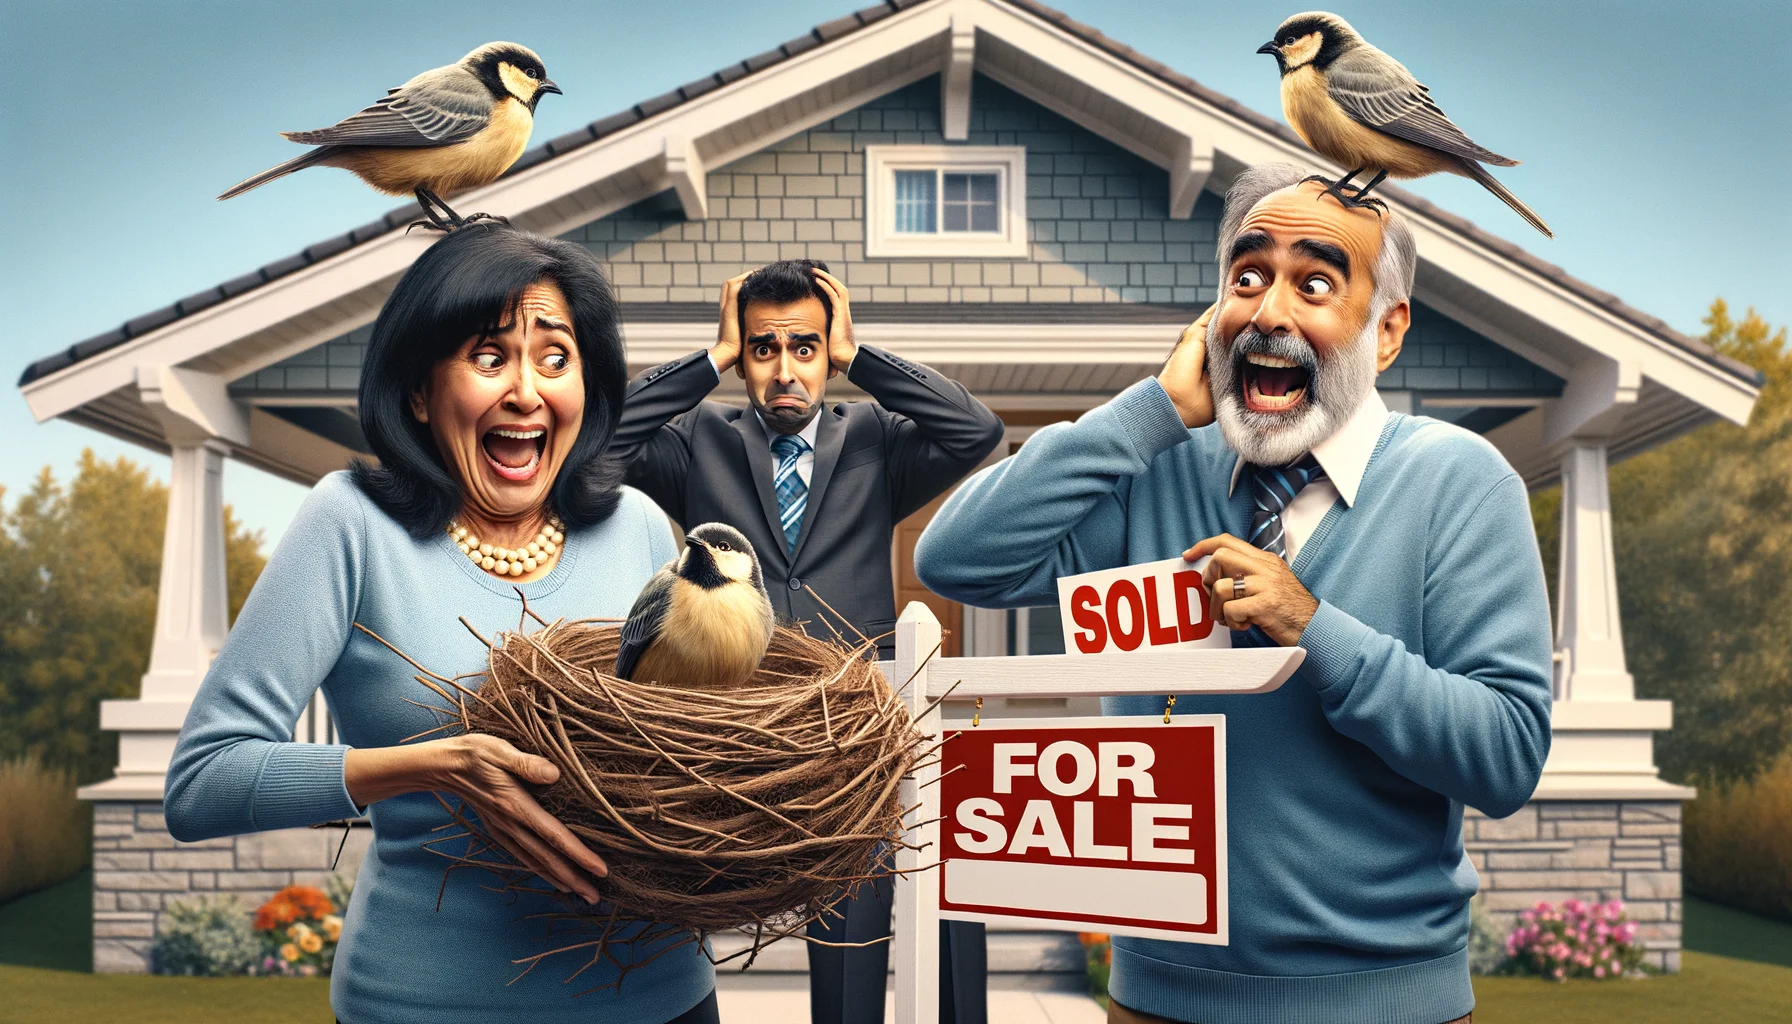 Generate a humorously realistic image of empty nesters during the home buying process. Picture a South Asian couple in their late 50s with wide grins as they joyfully take down the 'For Sale' sign in front of their new bungalow. Their bewildered Middle Eastern realtor is in the background, scratching his head at their overly enthusiastic antics. Include a nest-themed 'Sold' sign as a fun pun related to their 'empty nest' status. Create a hilarious contrast by having a few confused birds perched on the sign, looking at the ecstatic couple.